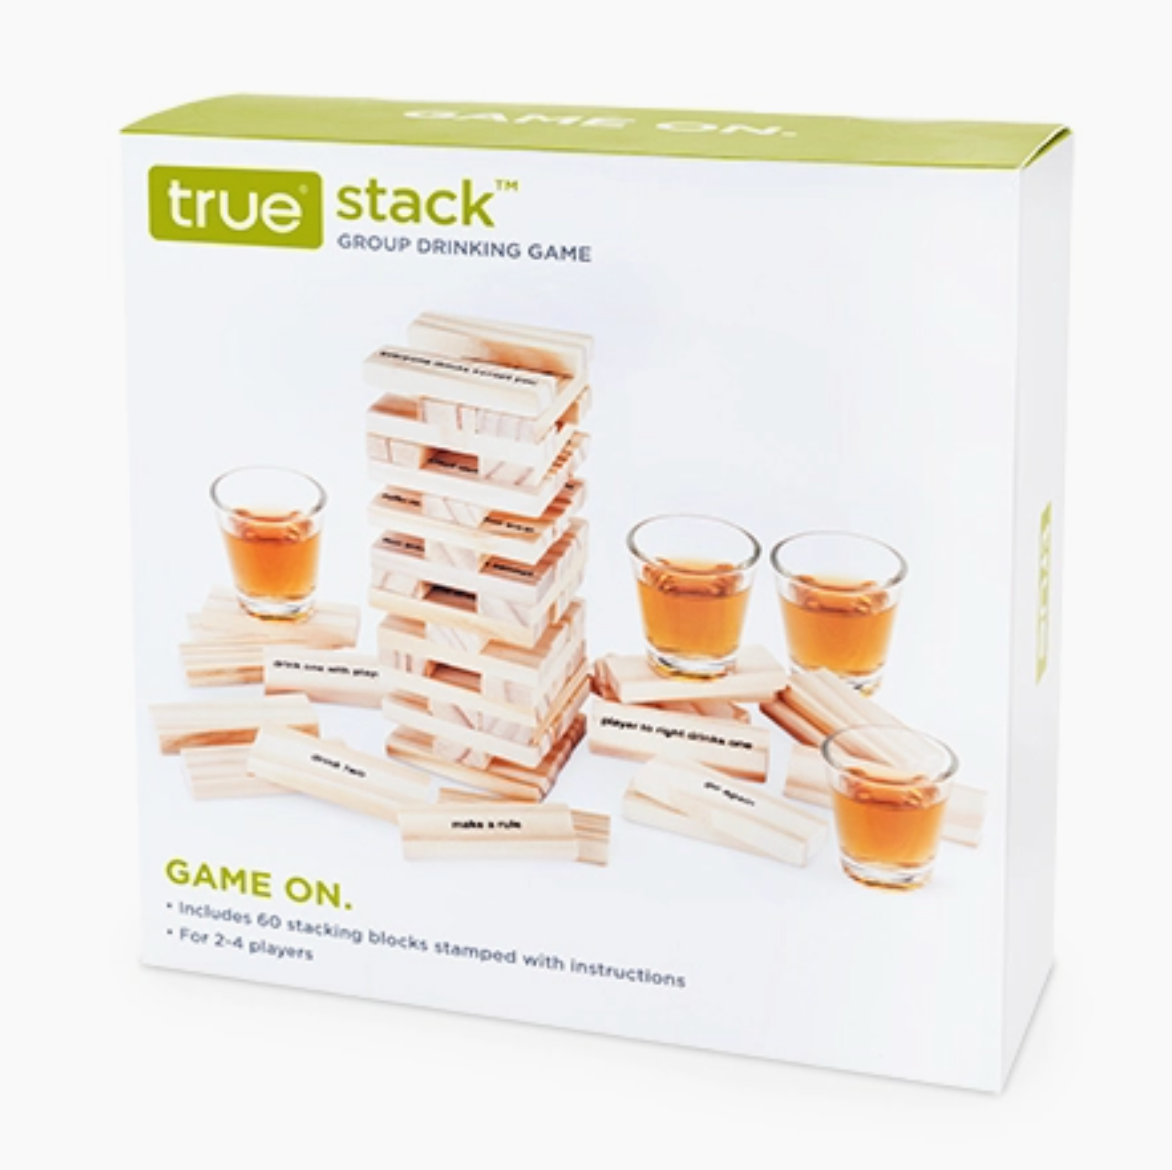 Stack™ Group Drinking Game